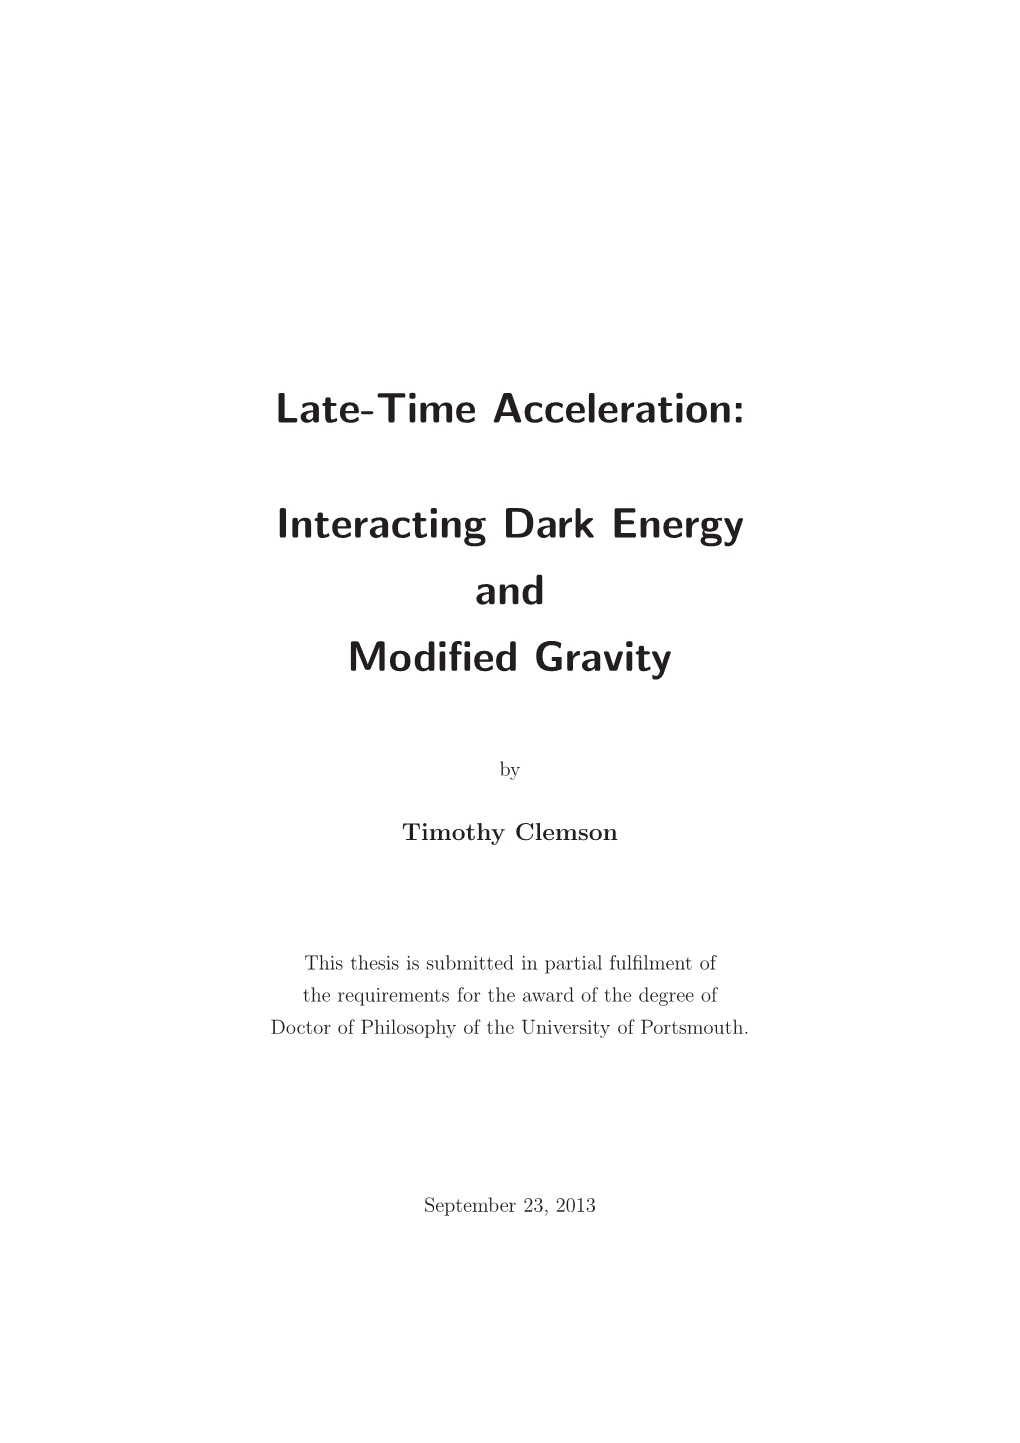 Interacting Dark Energy and Modified Gravity